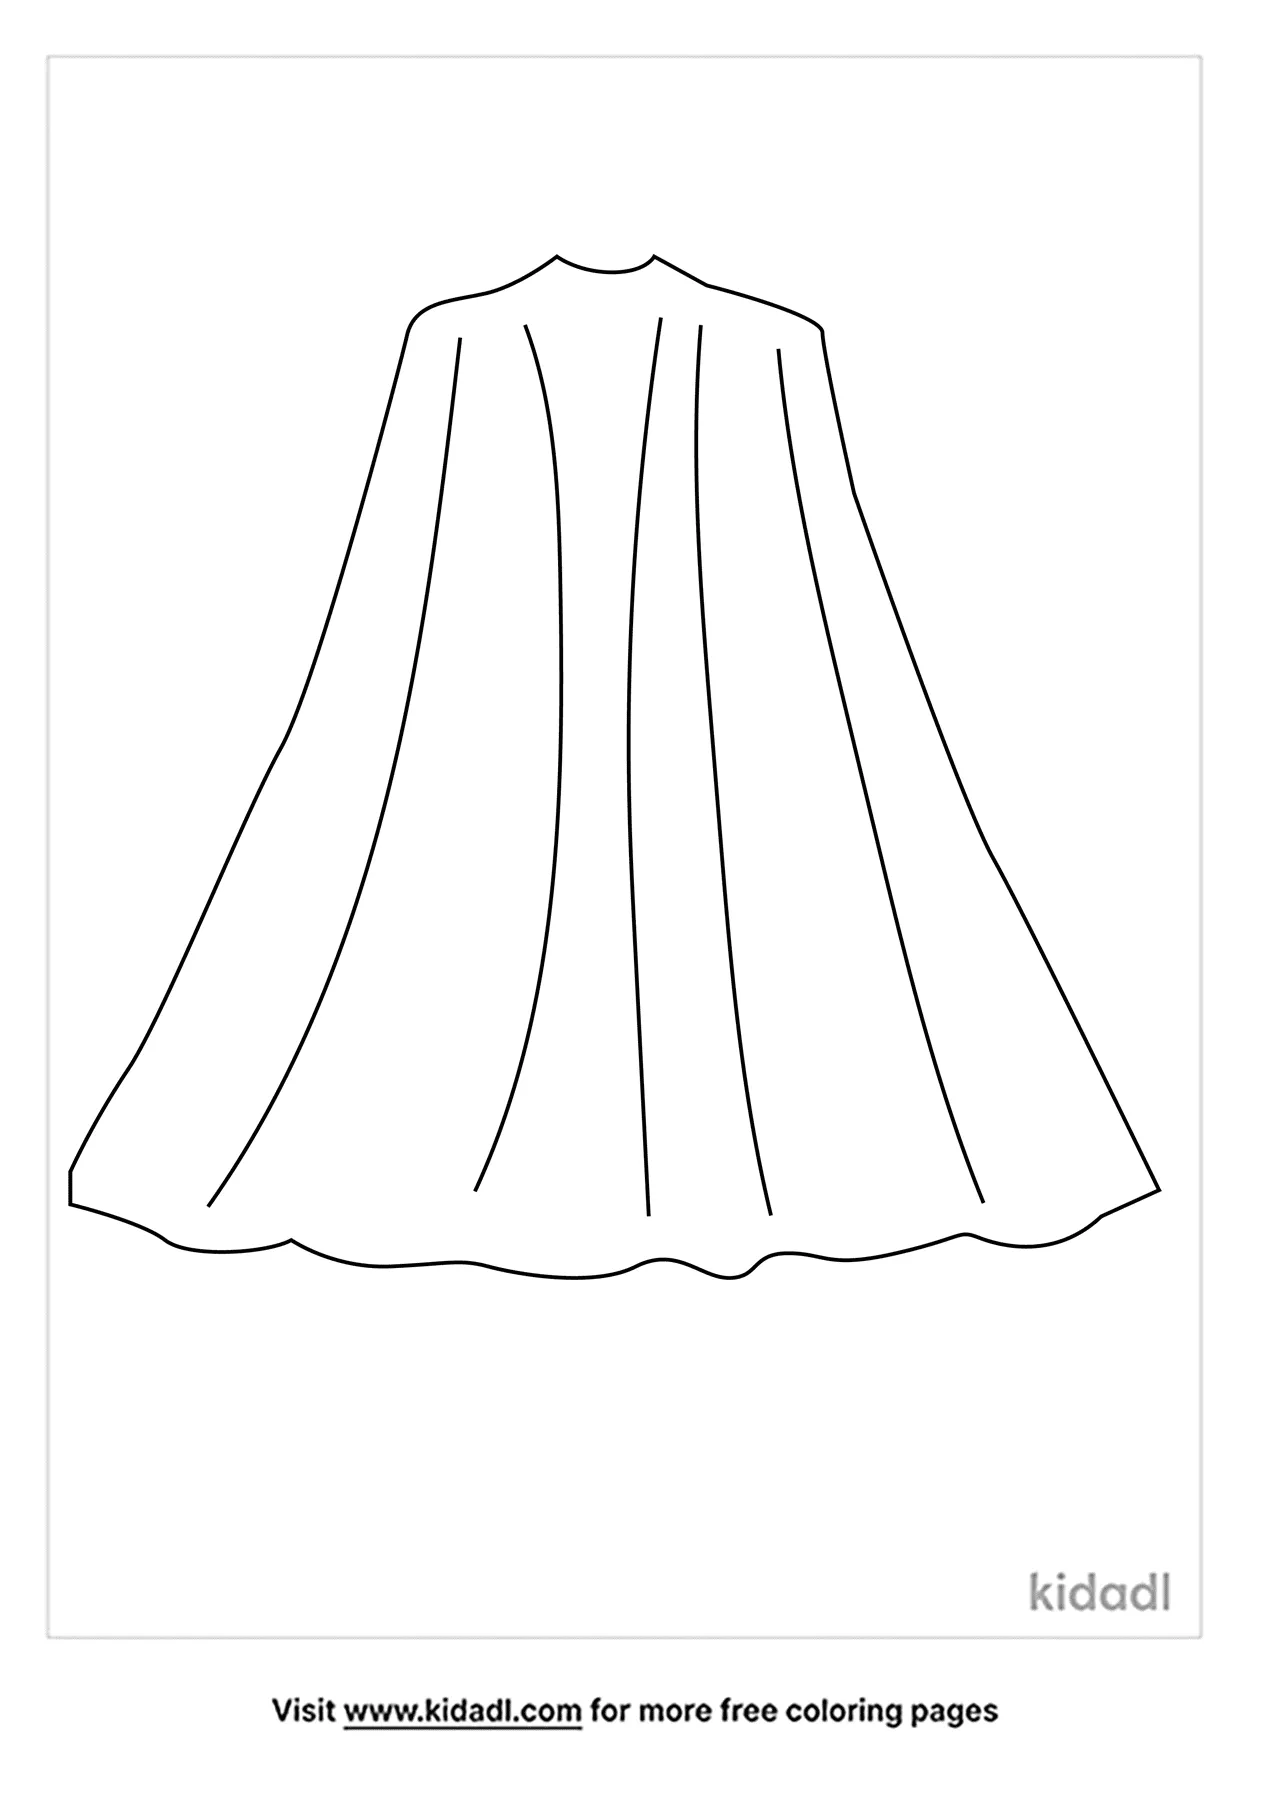 Free superhero cape coloring page coloring page printables